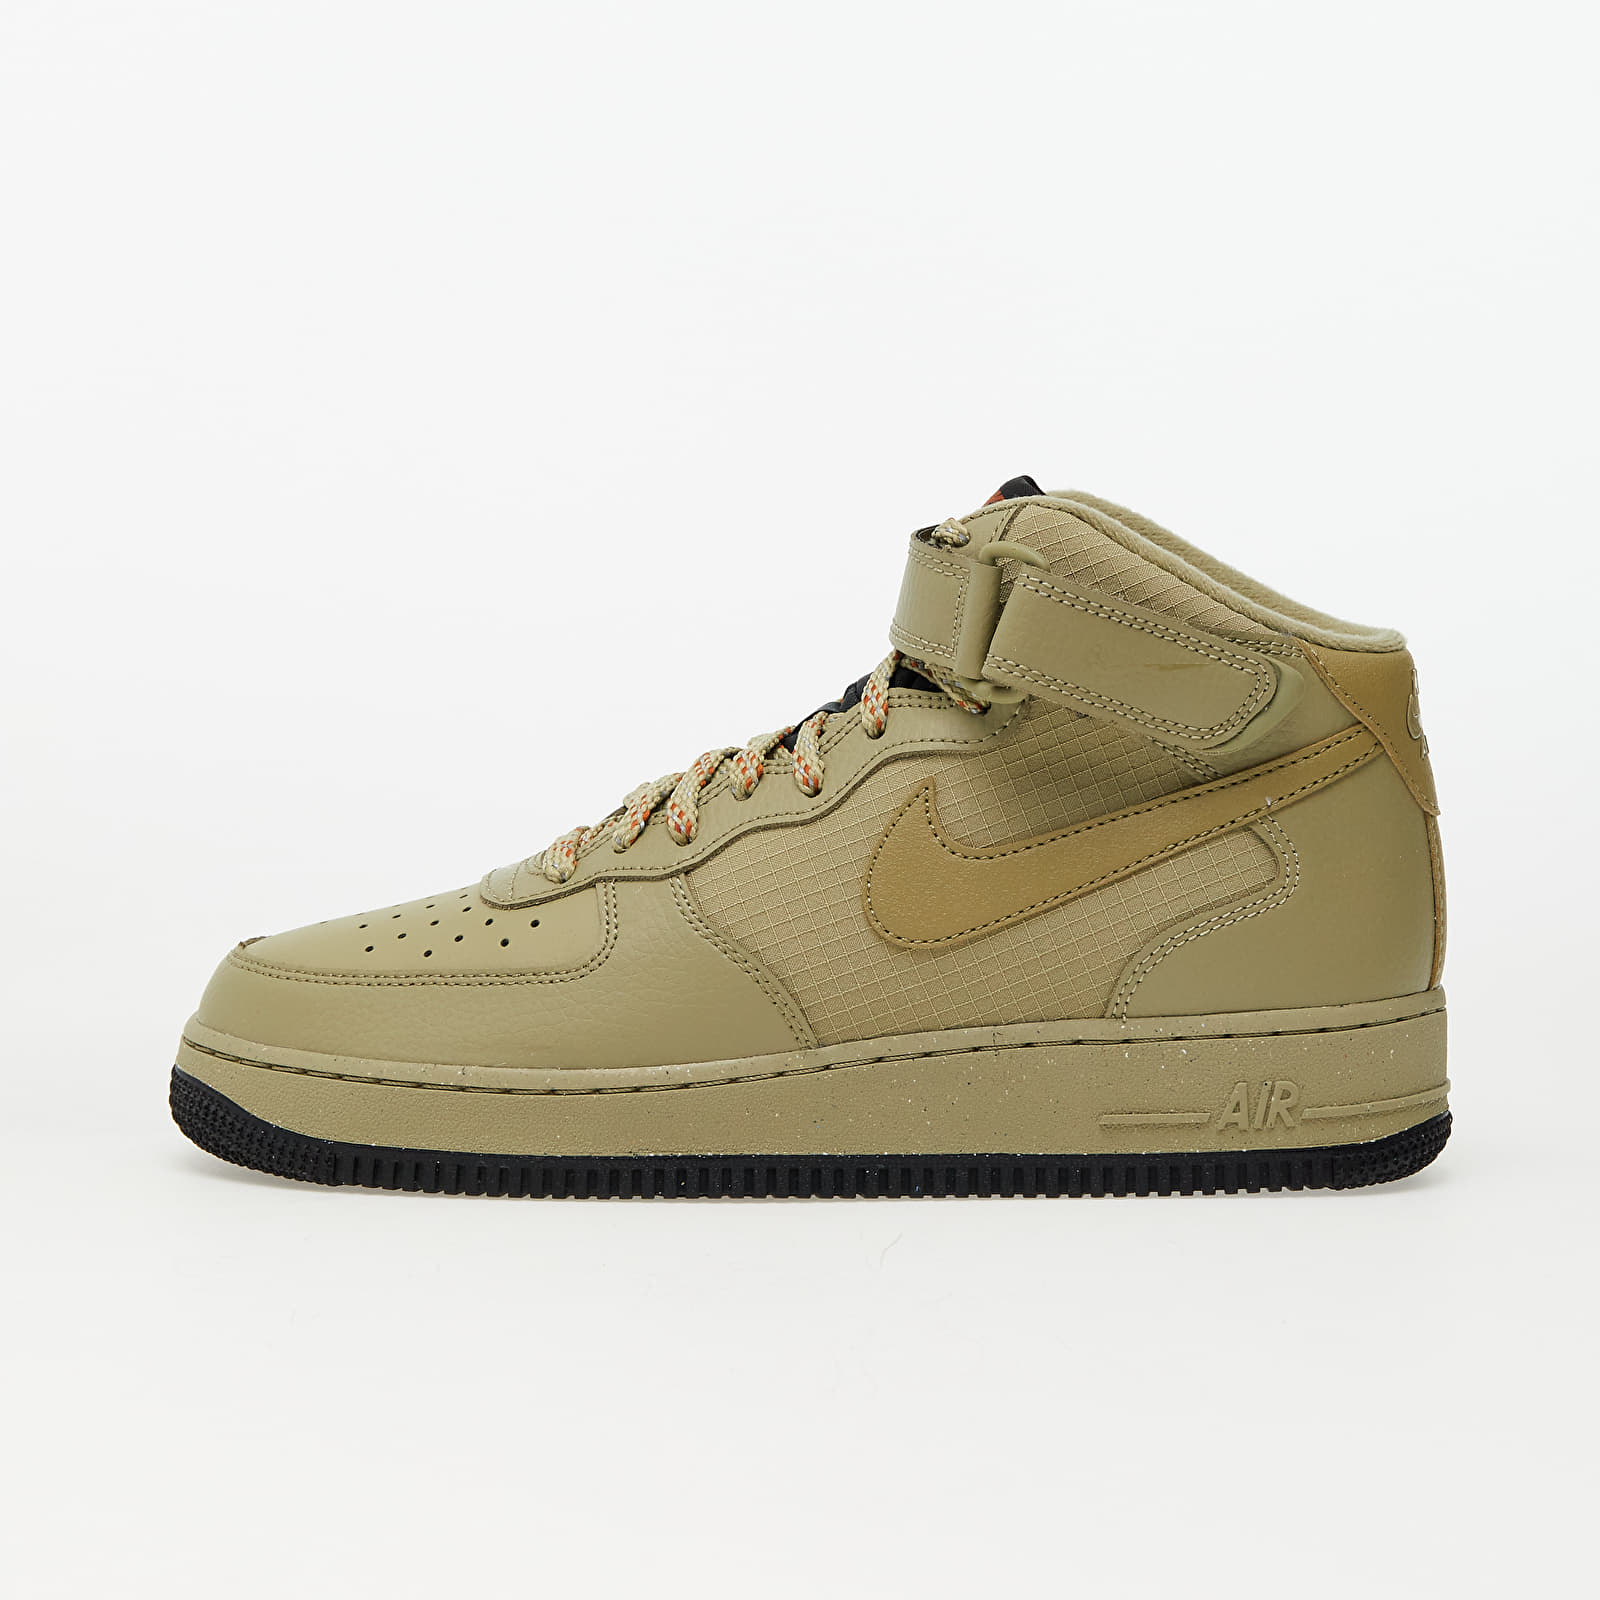 Men's shoes Nike Air Force 1 Mid '07 Neutral Olive/ Neutral Olive-Black